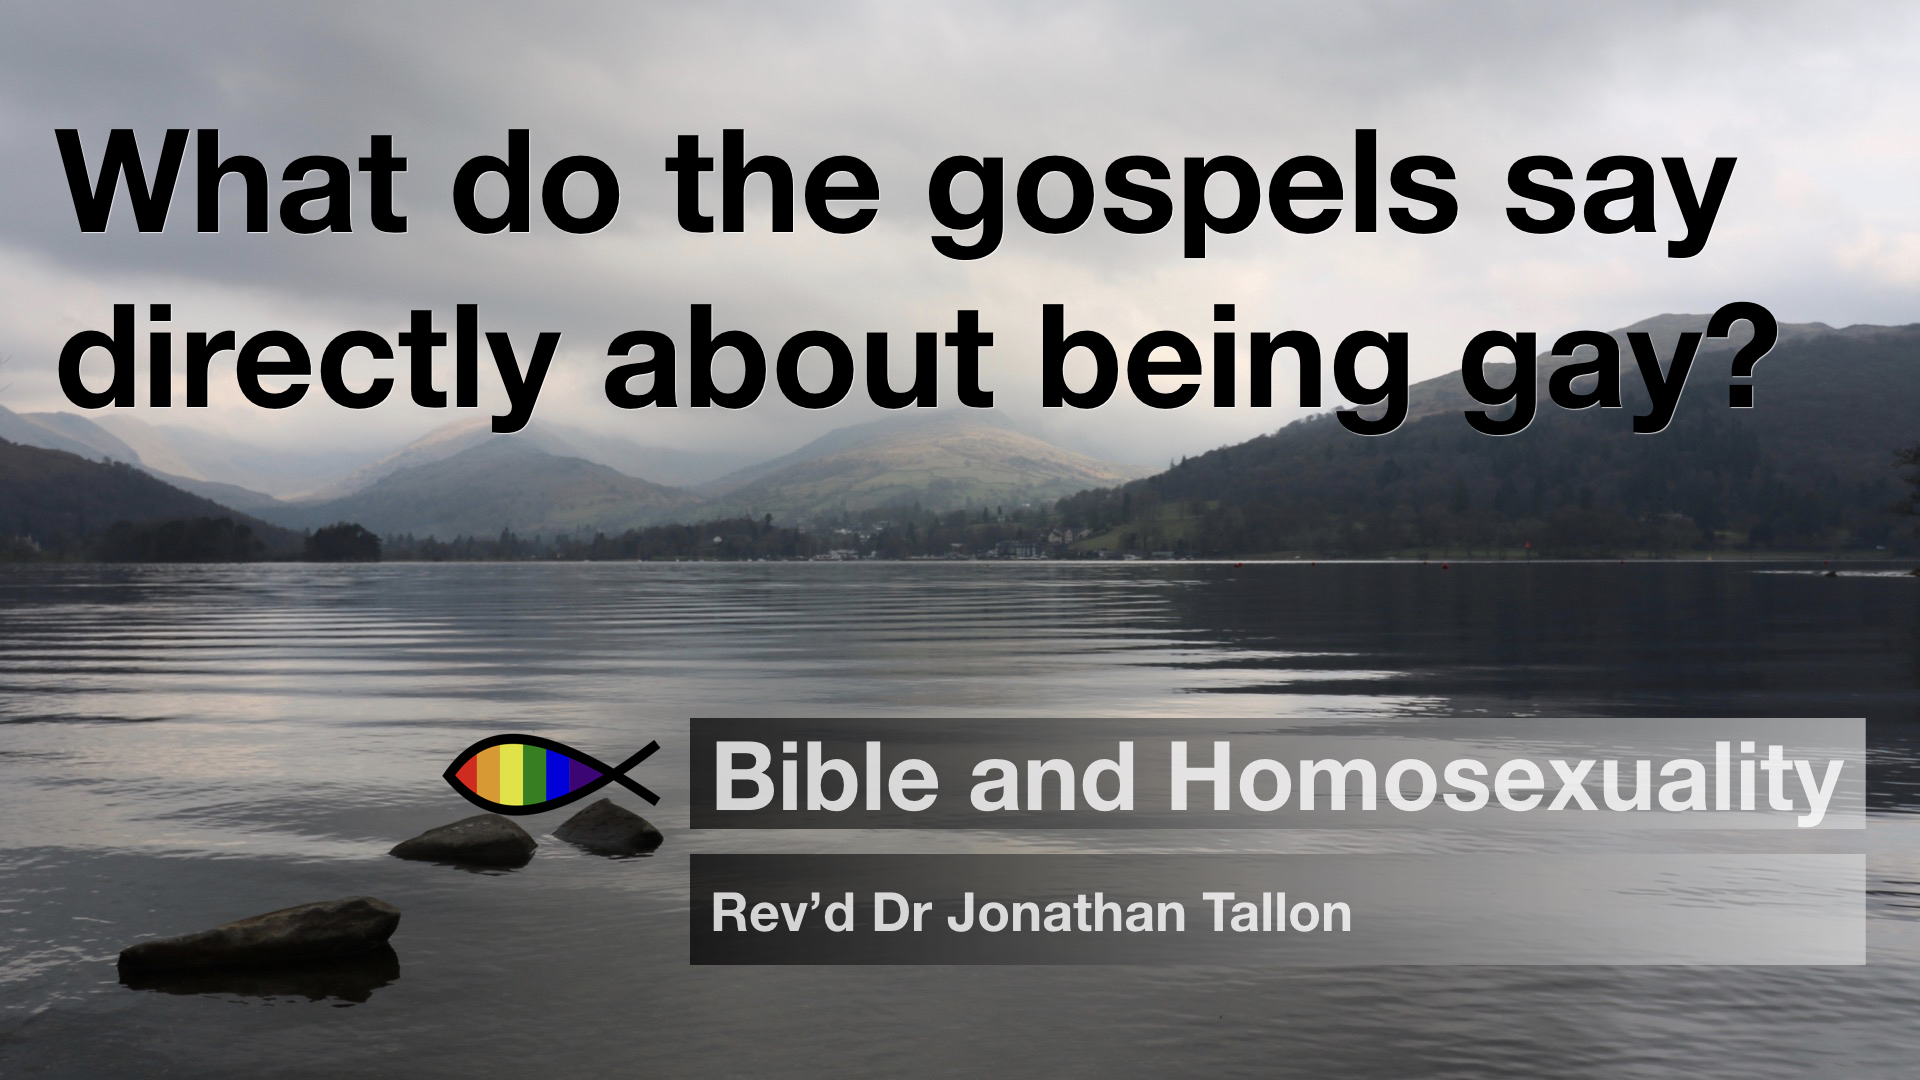 What do the gospels say directly about being gay?